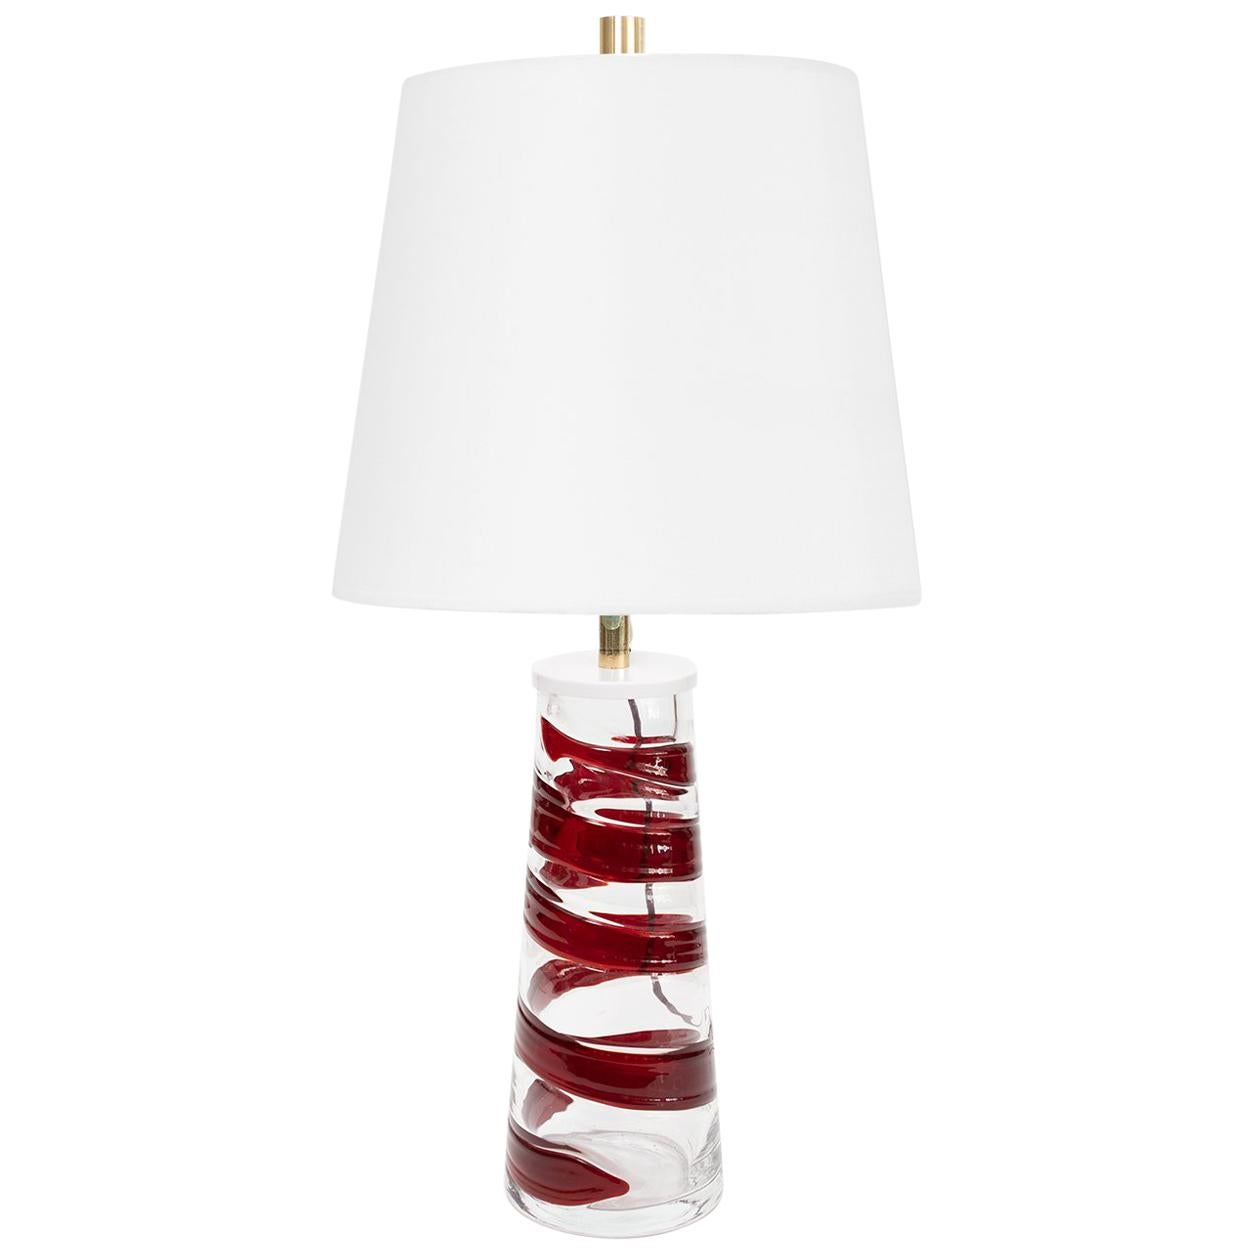 Philips Mid-Century Modern Spiral Glass Lamp, Red